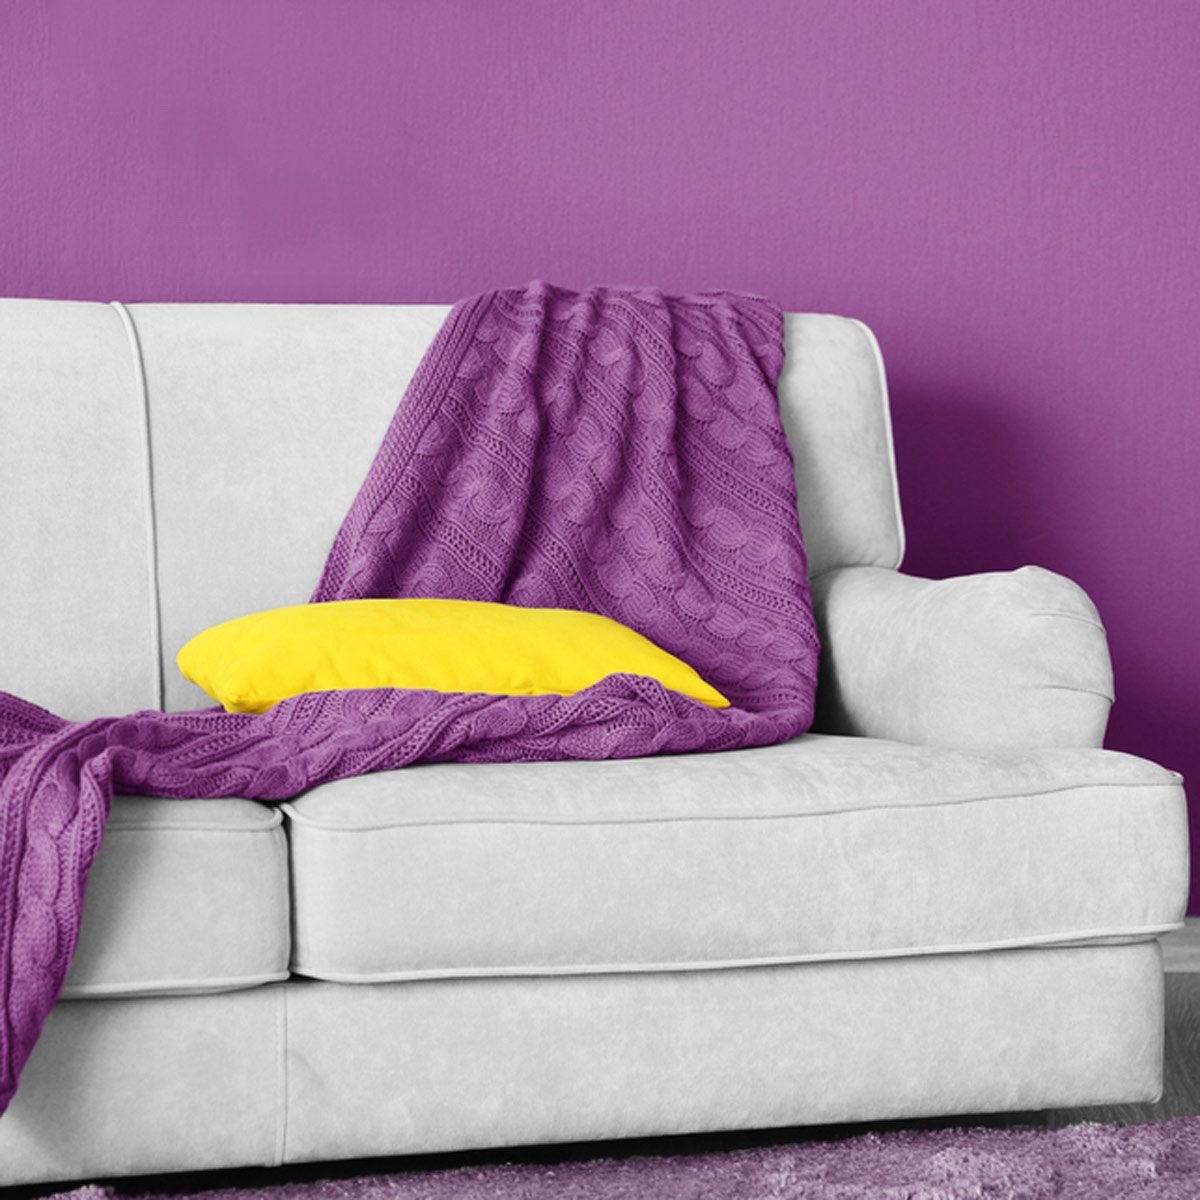 10 Ideas for Using Pantone’s Ultra-Violet 2018 Color of the Year in Your House